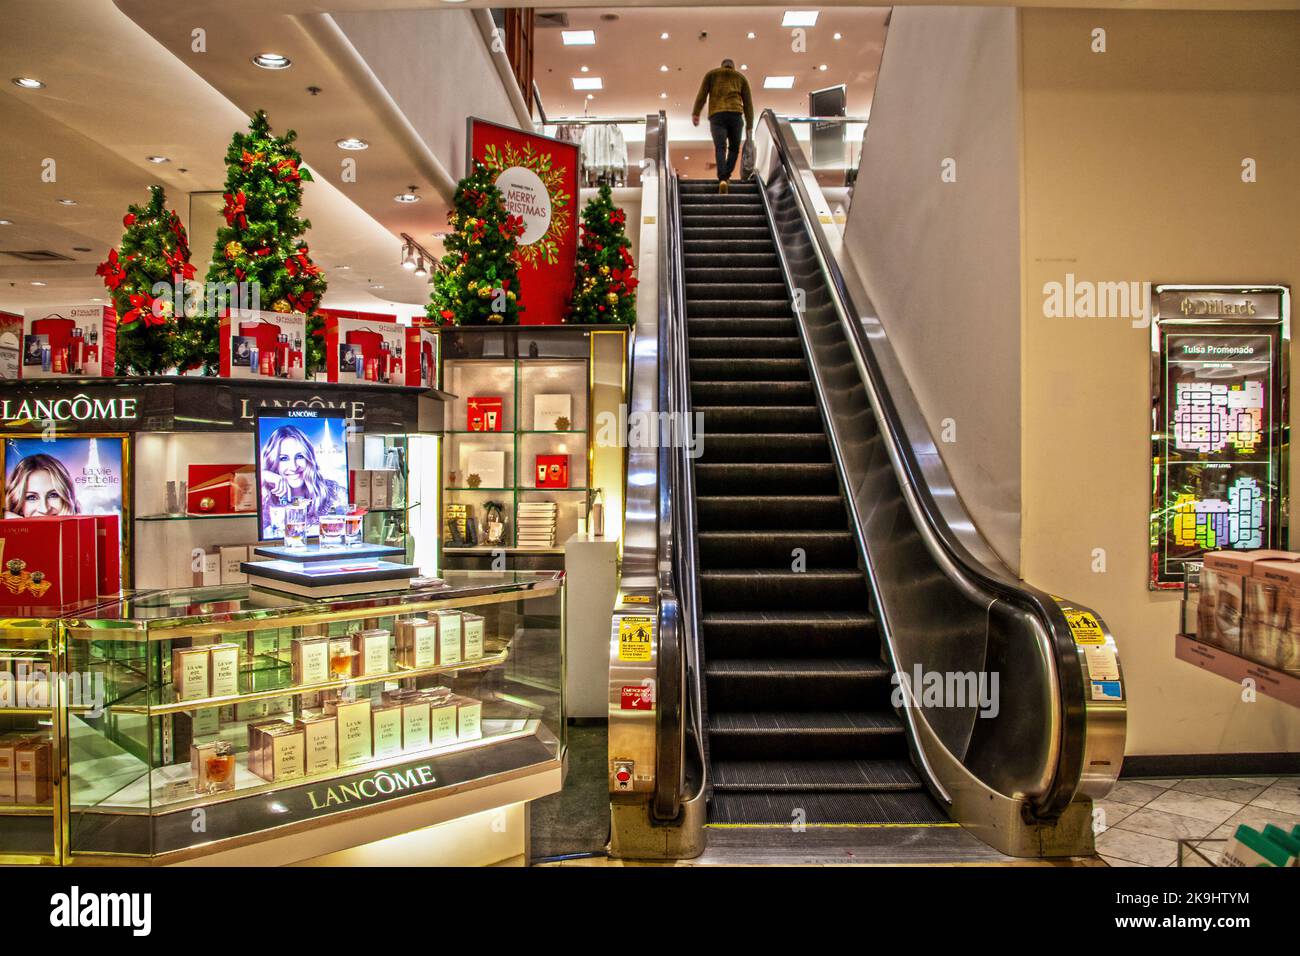 12-17-2021 Tulsa USA Customer at top of escalator in department store at Christmas with Lancome counter to one side and Christmas trees decorating are Stock Photo